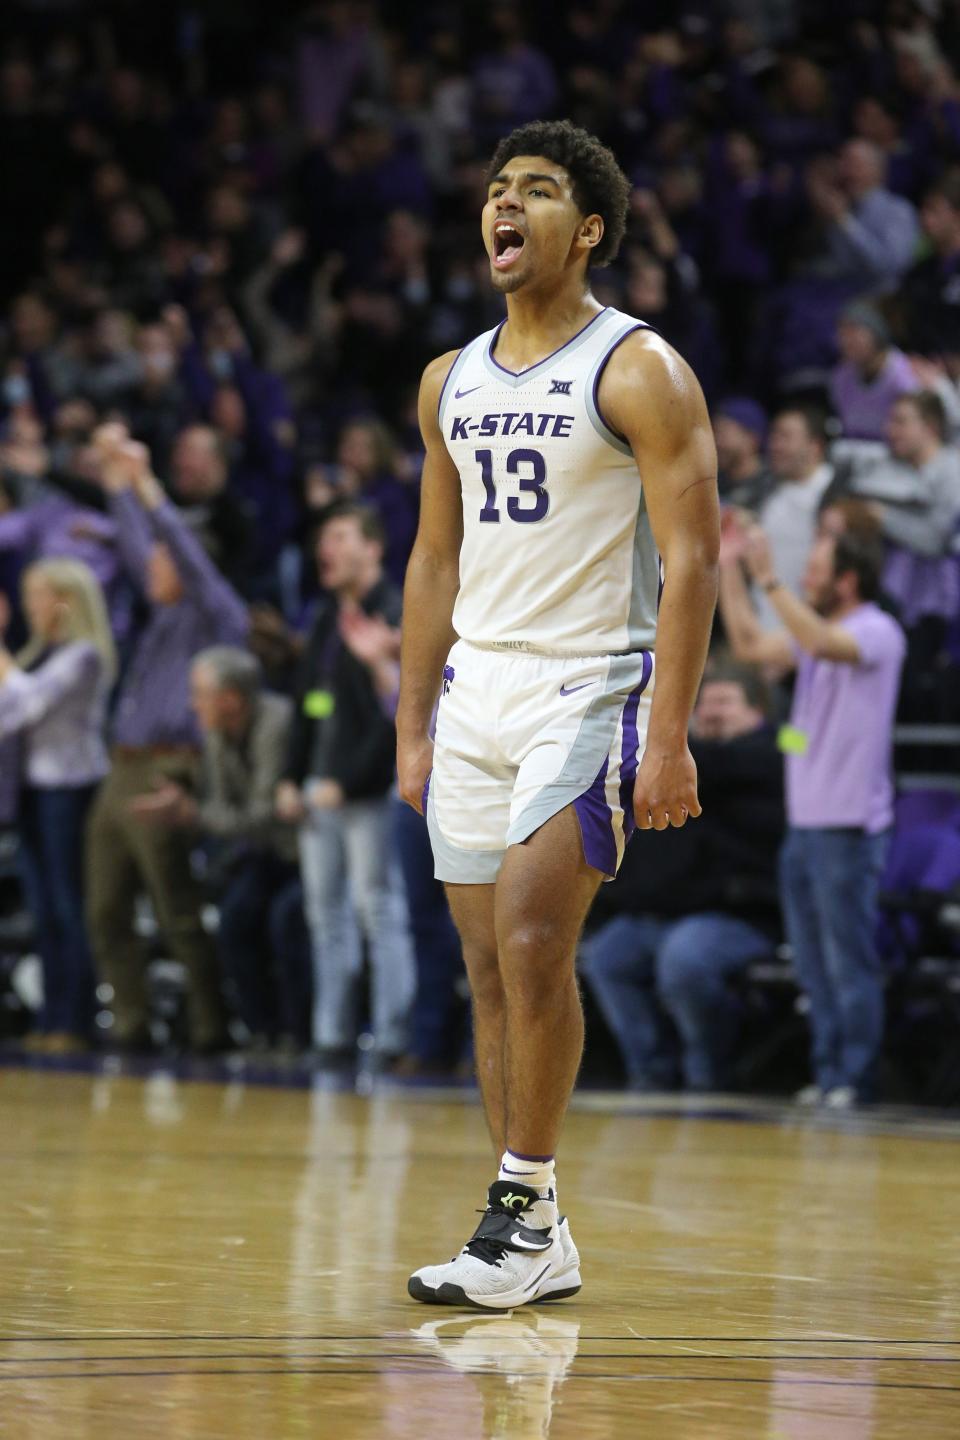 Kansas State's Mark Smith (12) reacts to a play during a Big 12 Conference game Saturday against No. 19 Texas Tech at Bramlage Coliseum in Manhattan, Kansas.